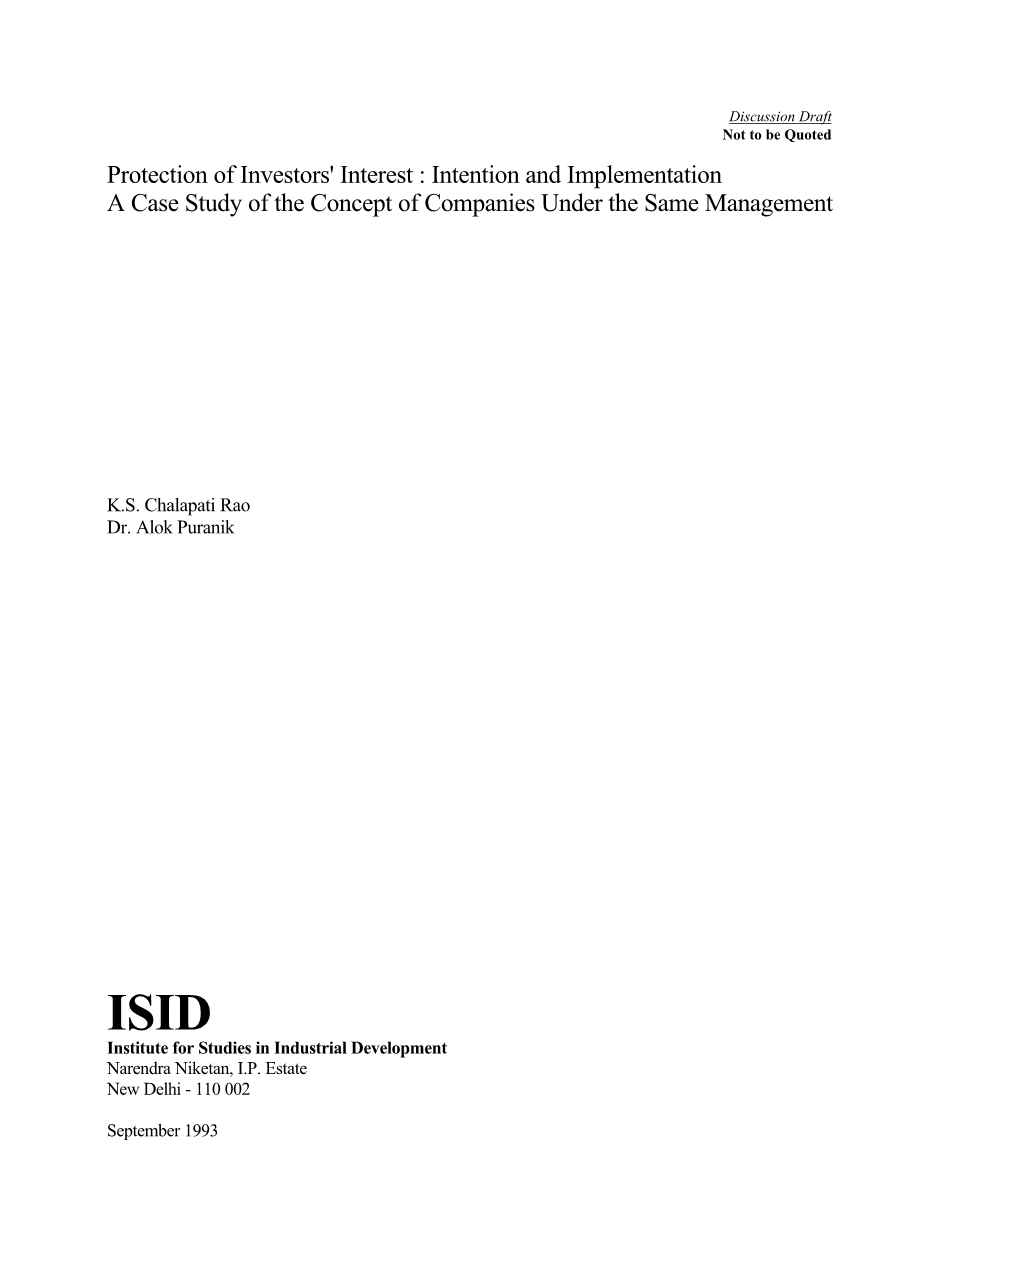 Protection of Investors' Interest : Intention and Implementation a Case Study of the Concept of Companies Under the Same Management